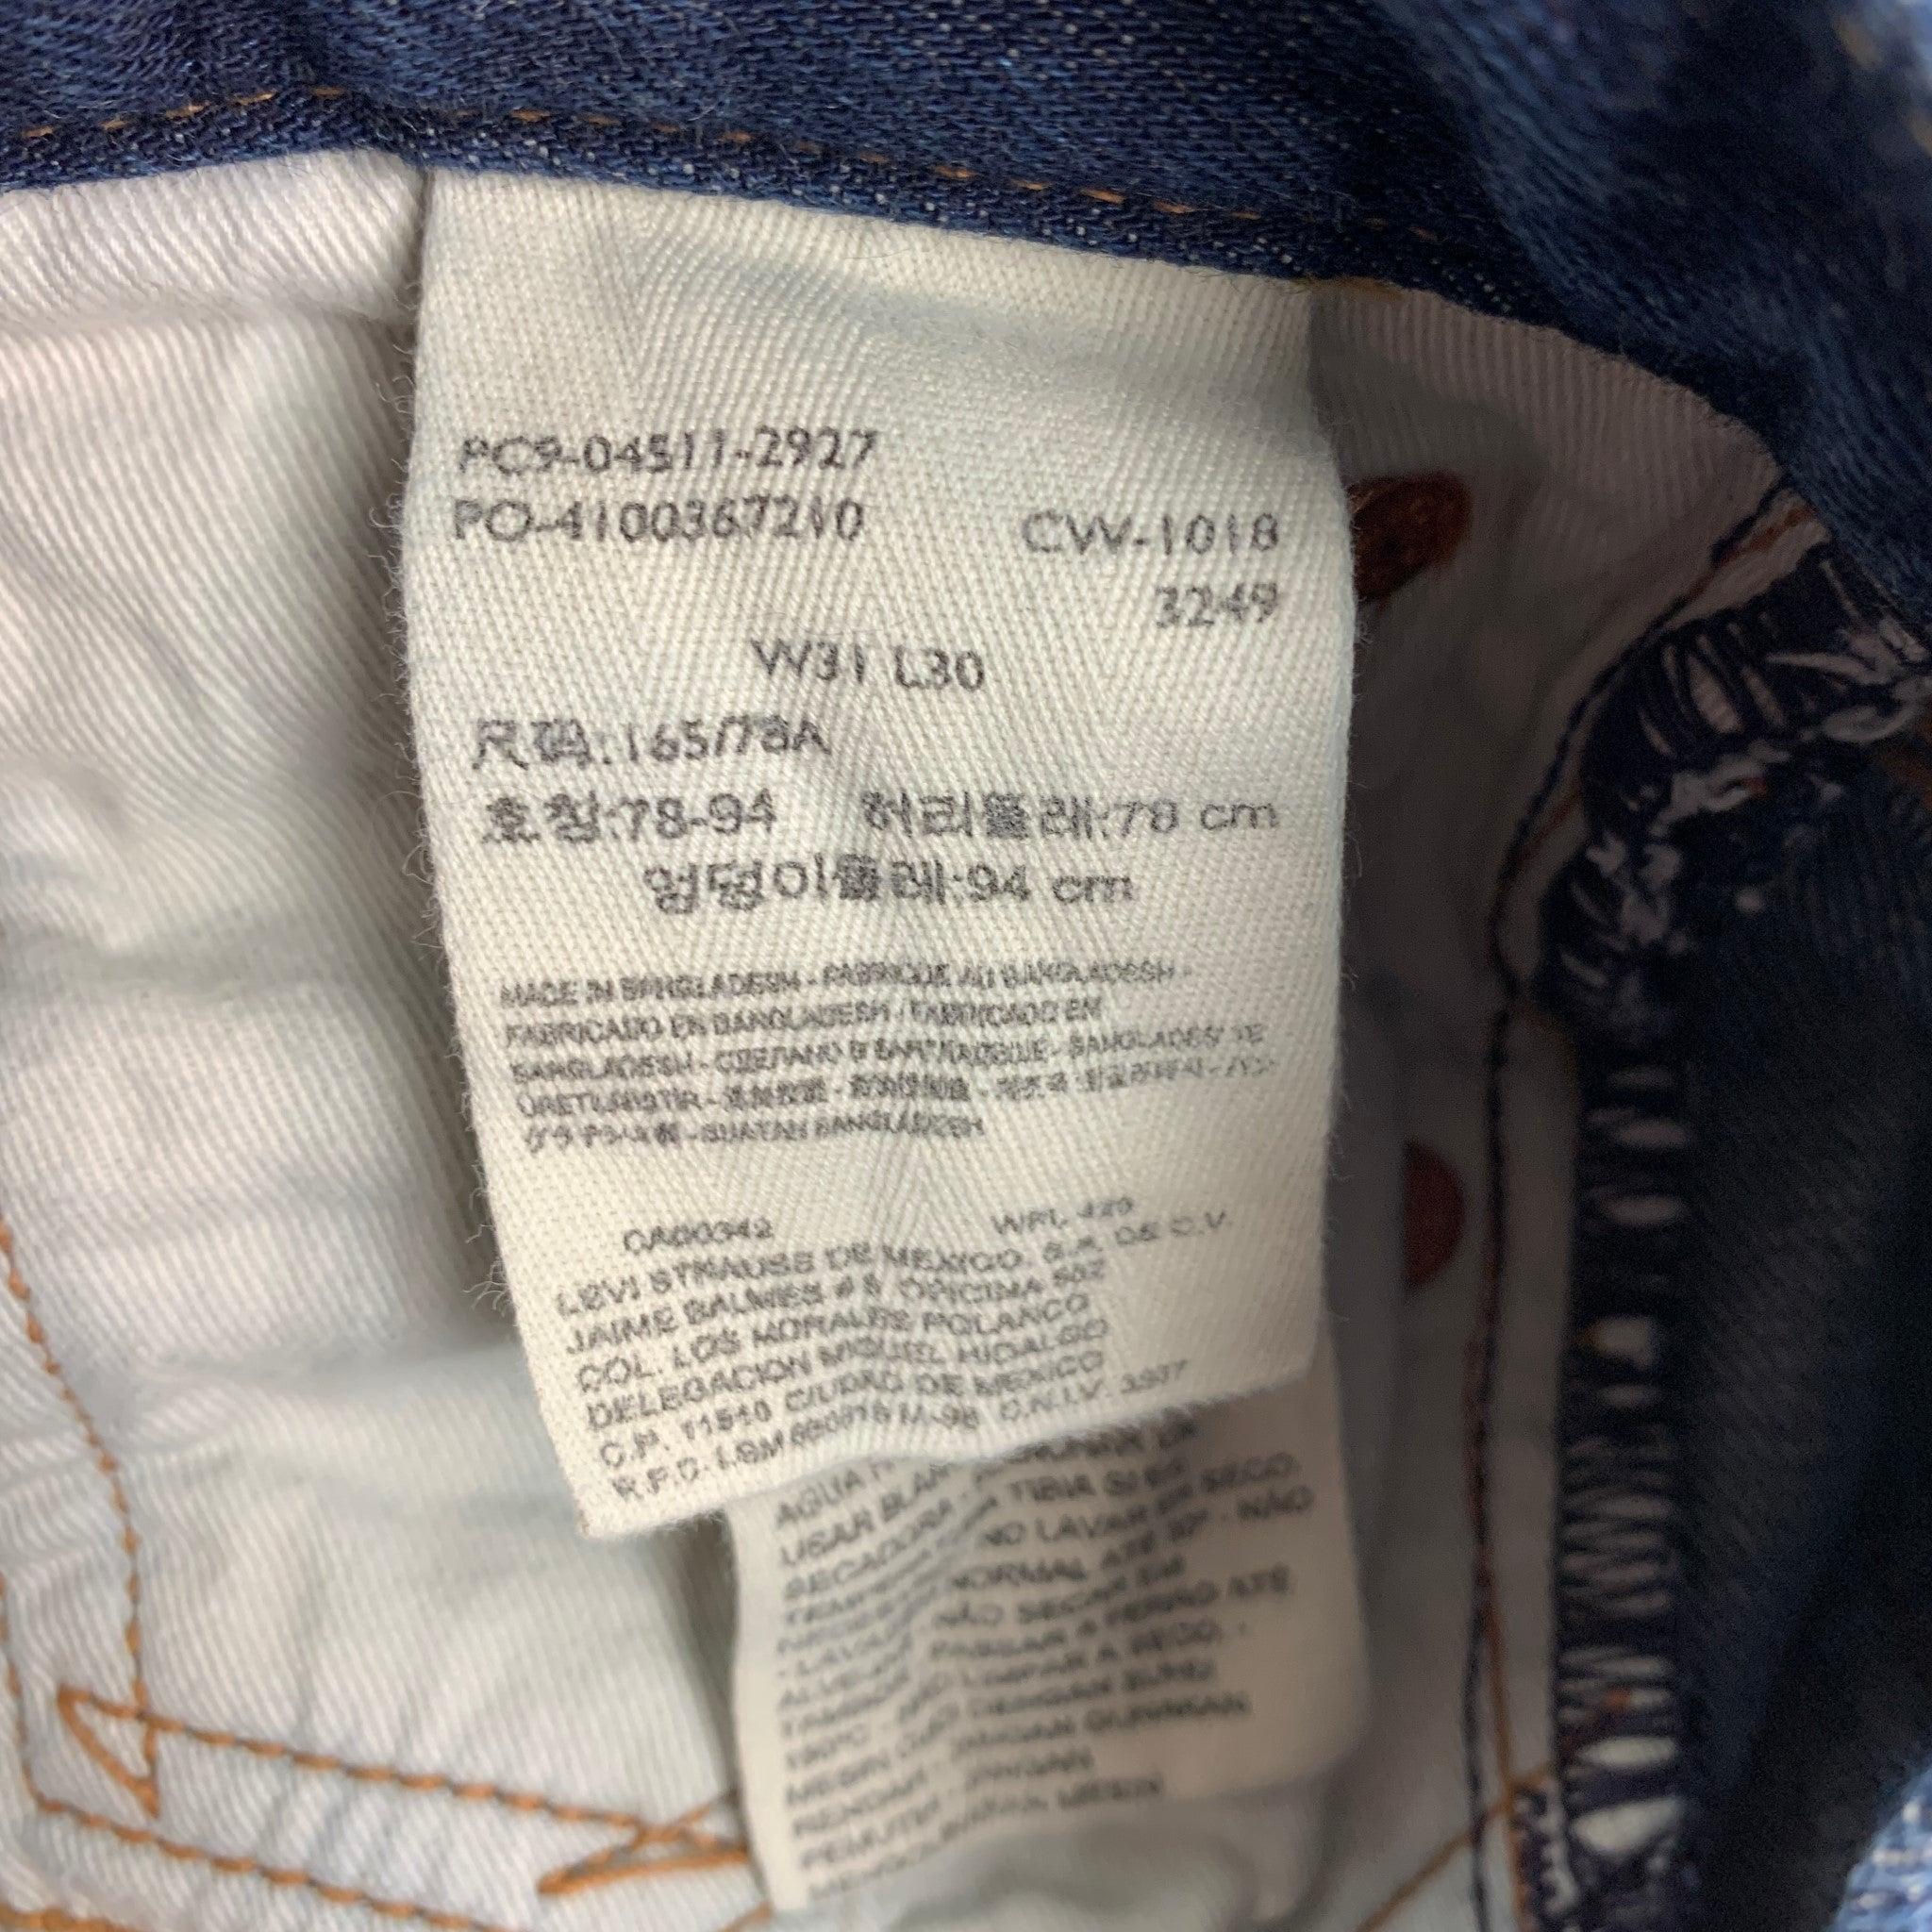 LEVI'S x OUTERKNOWN Size 31 Indigo Contrast Stitch Cotton Lyocell Slim Jeans In Good Condition For Sale In San Francisco, CA